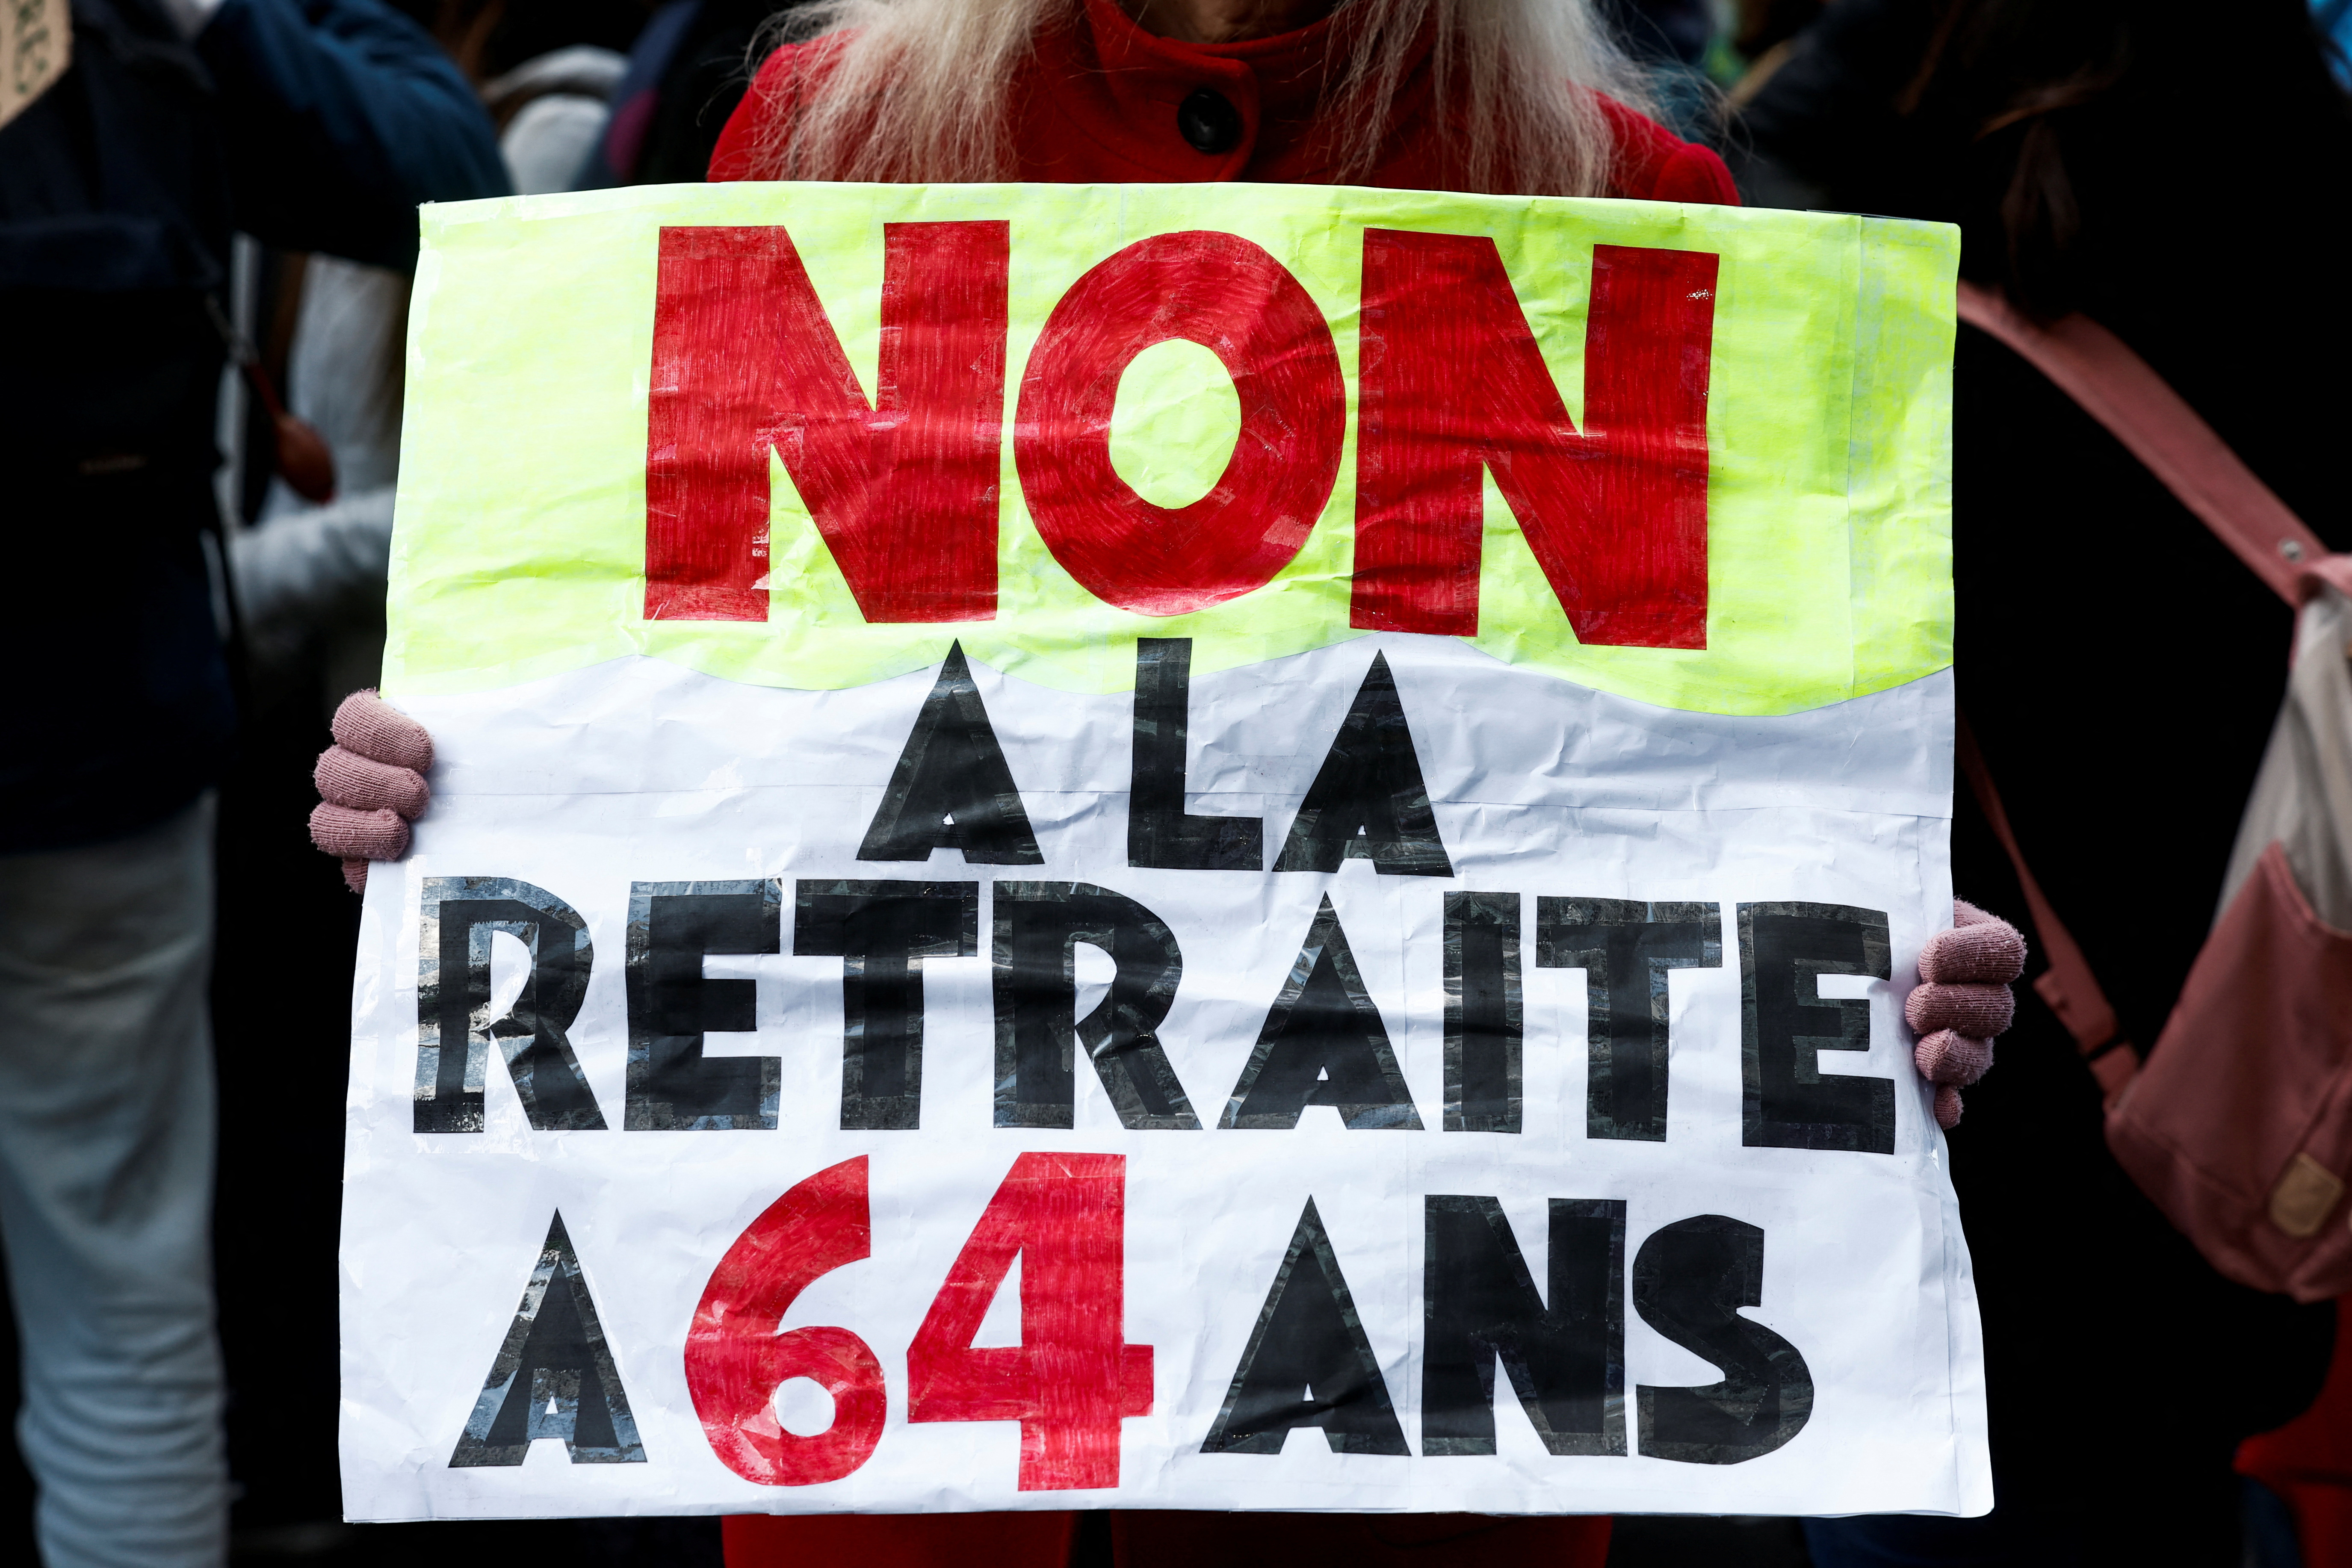 "No to retirement at 64 years old" (Reuters)